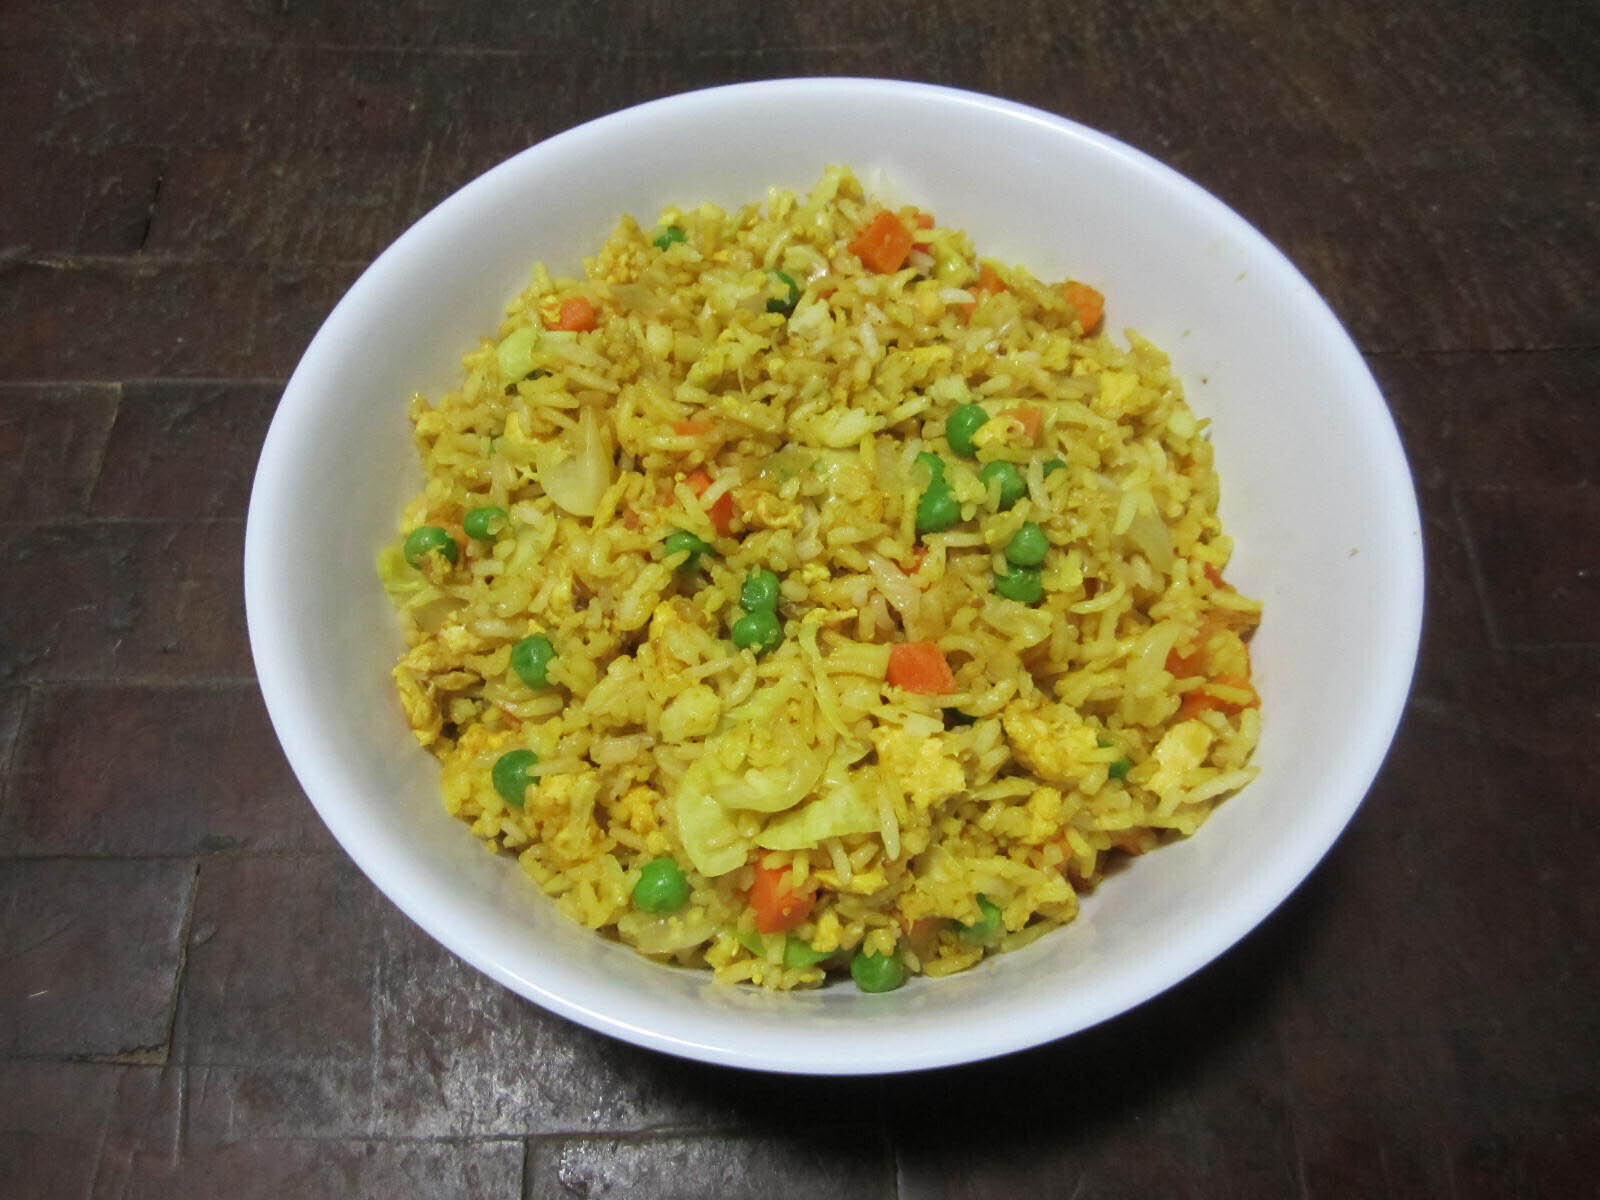 A bowl of yellow fried rice with peas, carrots, and onion